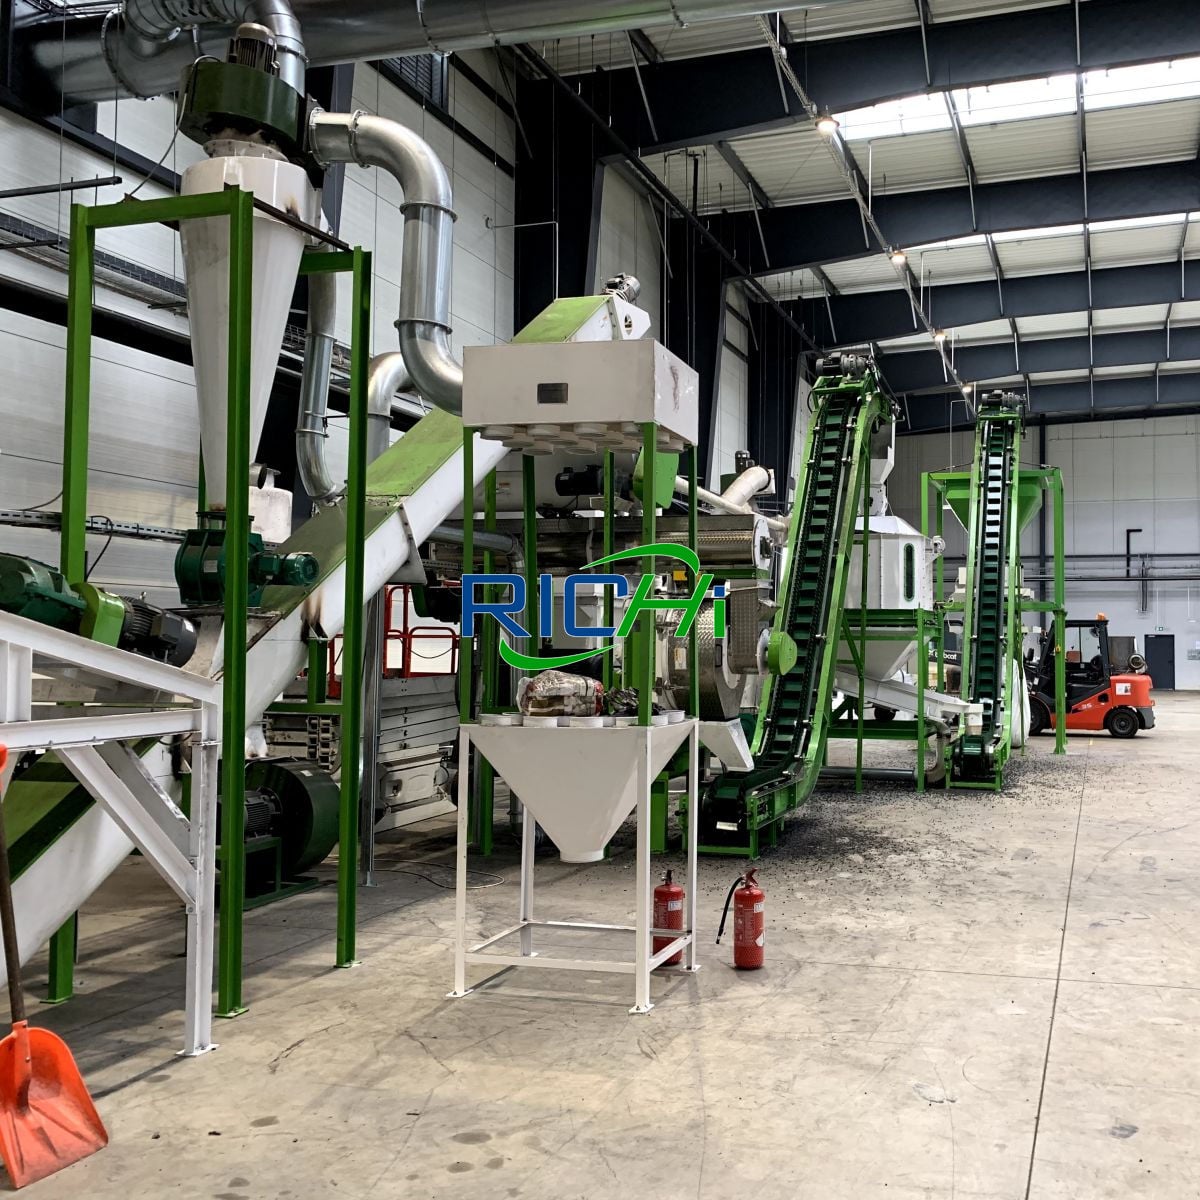 Canada biomass straw fuel pellet production line is under construction